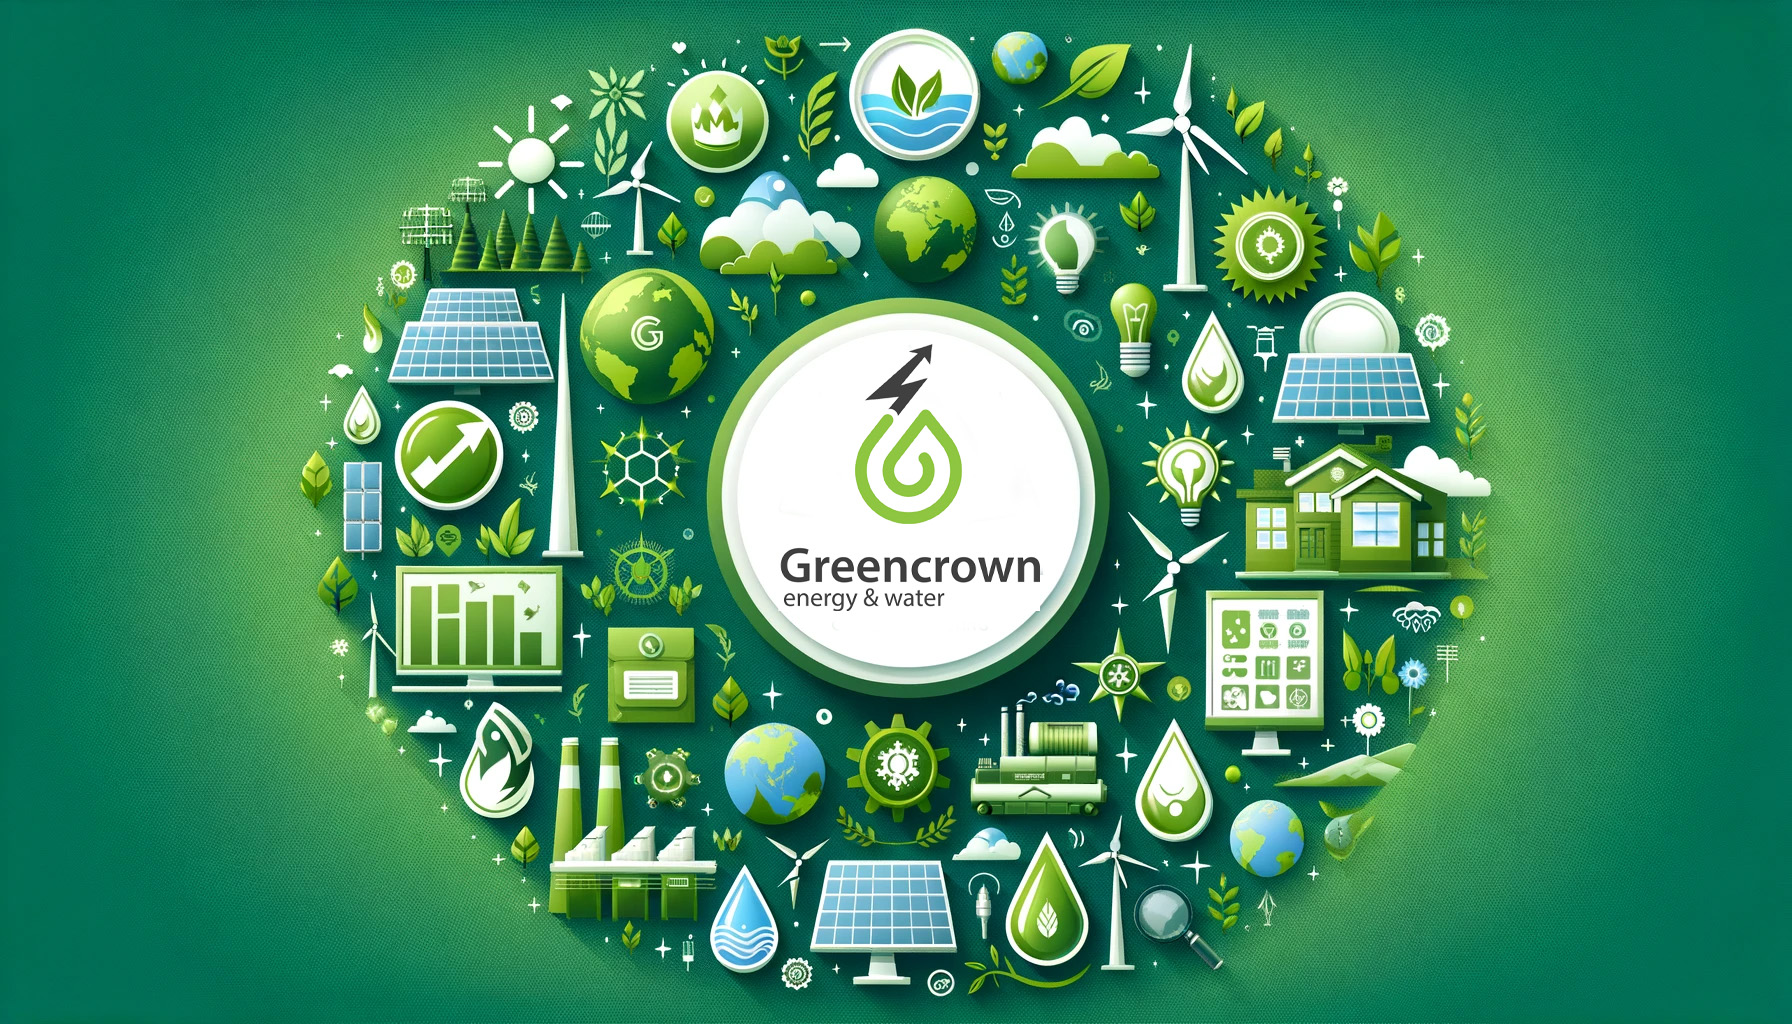 Top Energy Management Consulting Firm Greencrown Energy & Water A Leader in Energy Procurement, Efficiency, and Sustainability